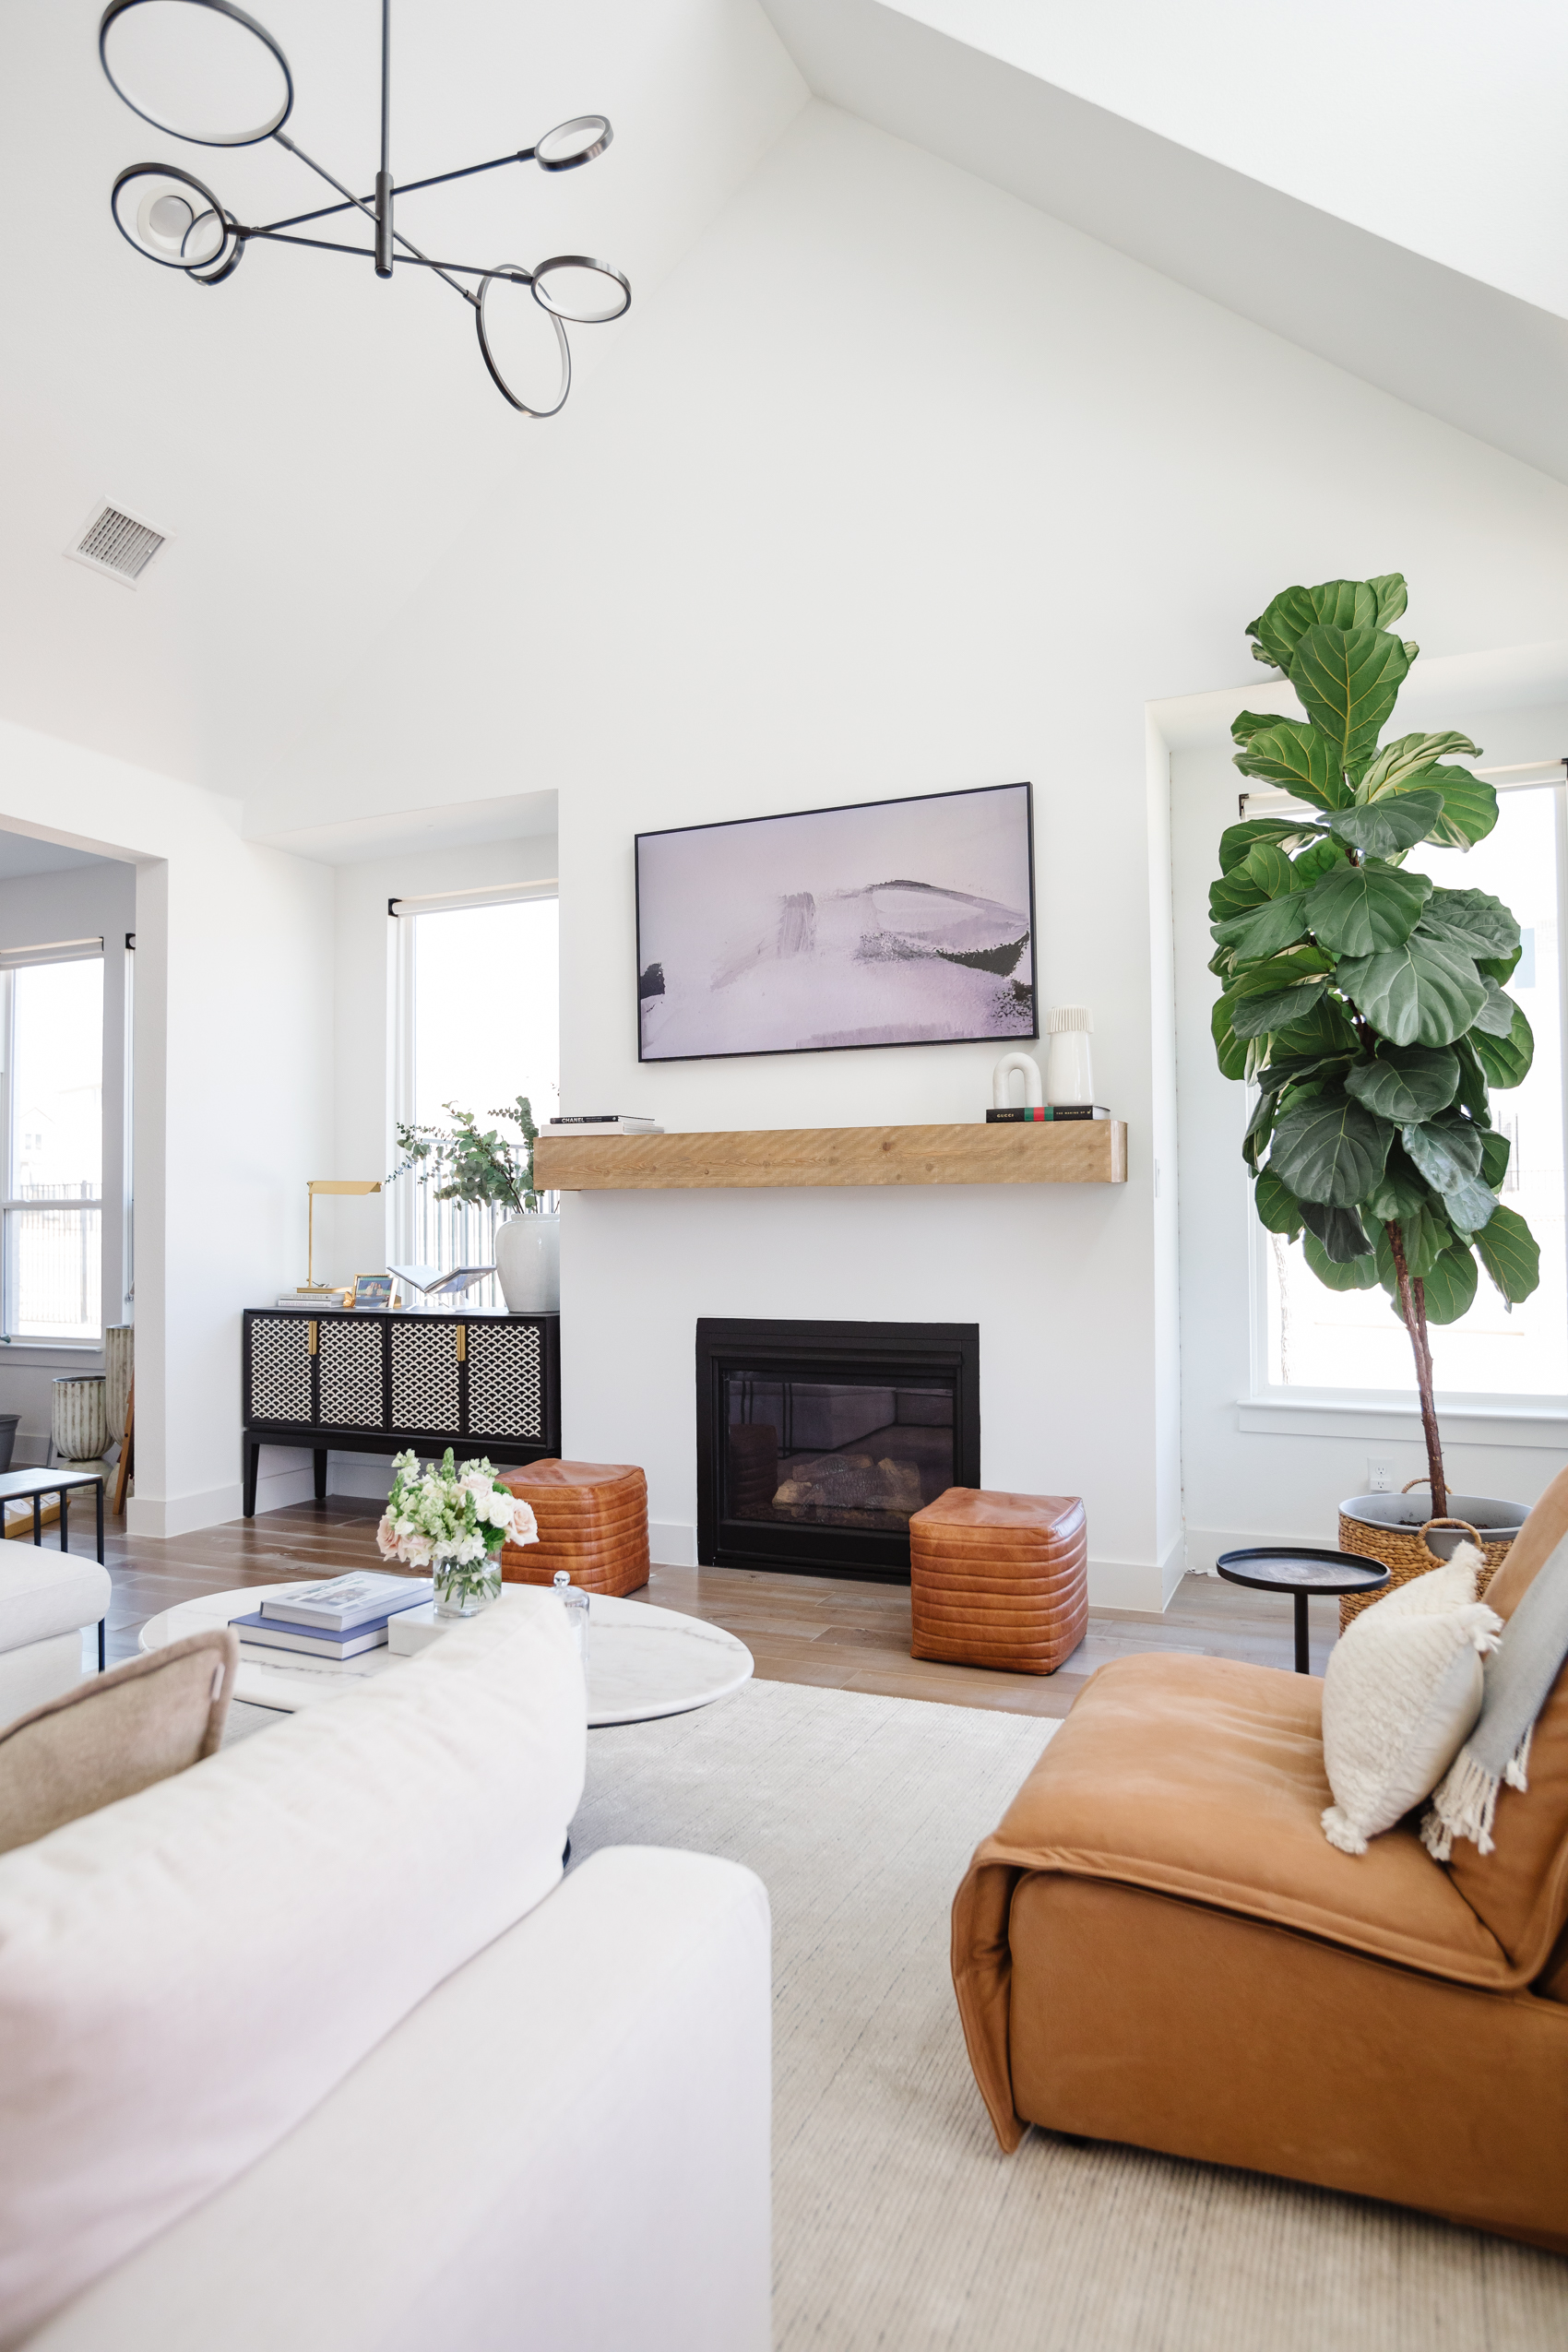 Blogger Hoang-Kim Cung's living room in her transitional style home with a Samsung Frame TV, fiddle leaf fig, Arhaus leather poufs, Arhaus leather recliner, and Arhaus bar cabinet